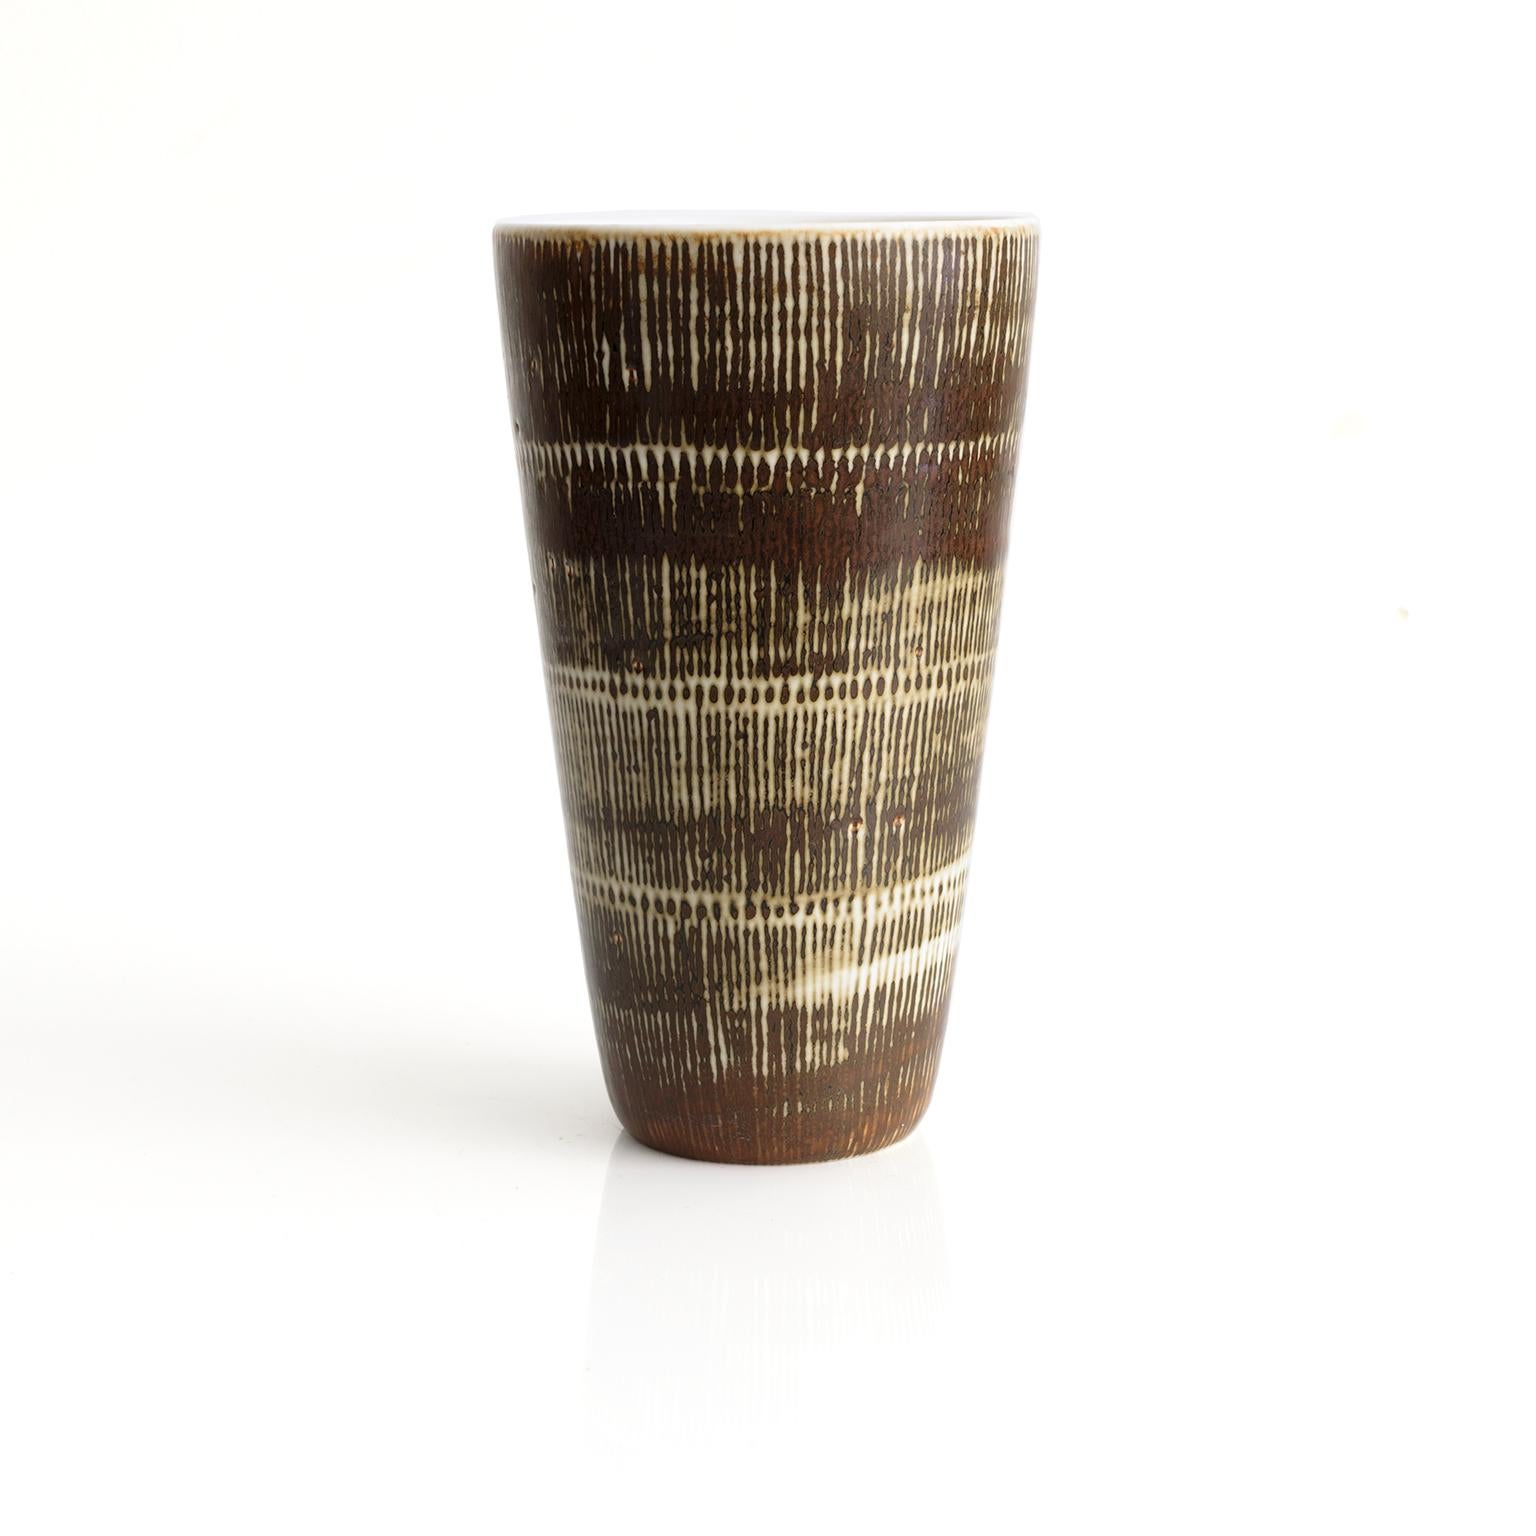 Hertha Bengtsson designed conical form Swedish mid-century vase produced at Rorstrand, Studio, circa 1960. Bengtsson was a master of pattern and texture and this piece is a fine example of thee skills. Over glazed brown over a creamy white, signed